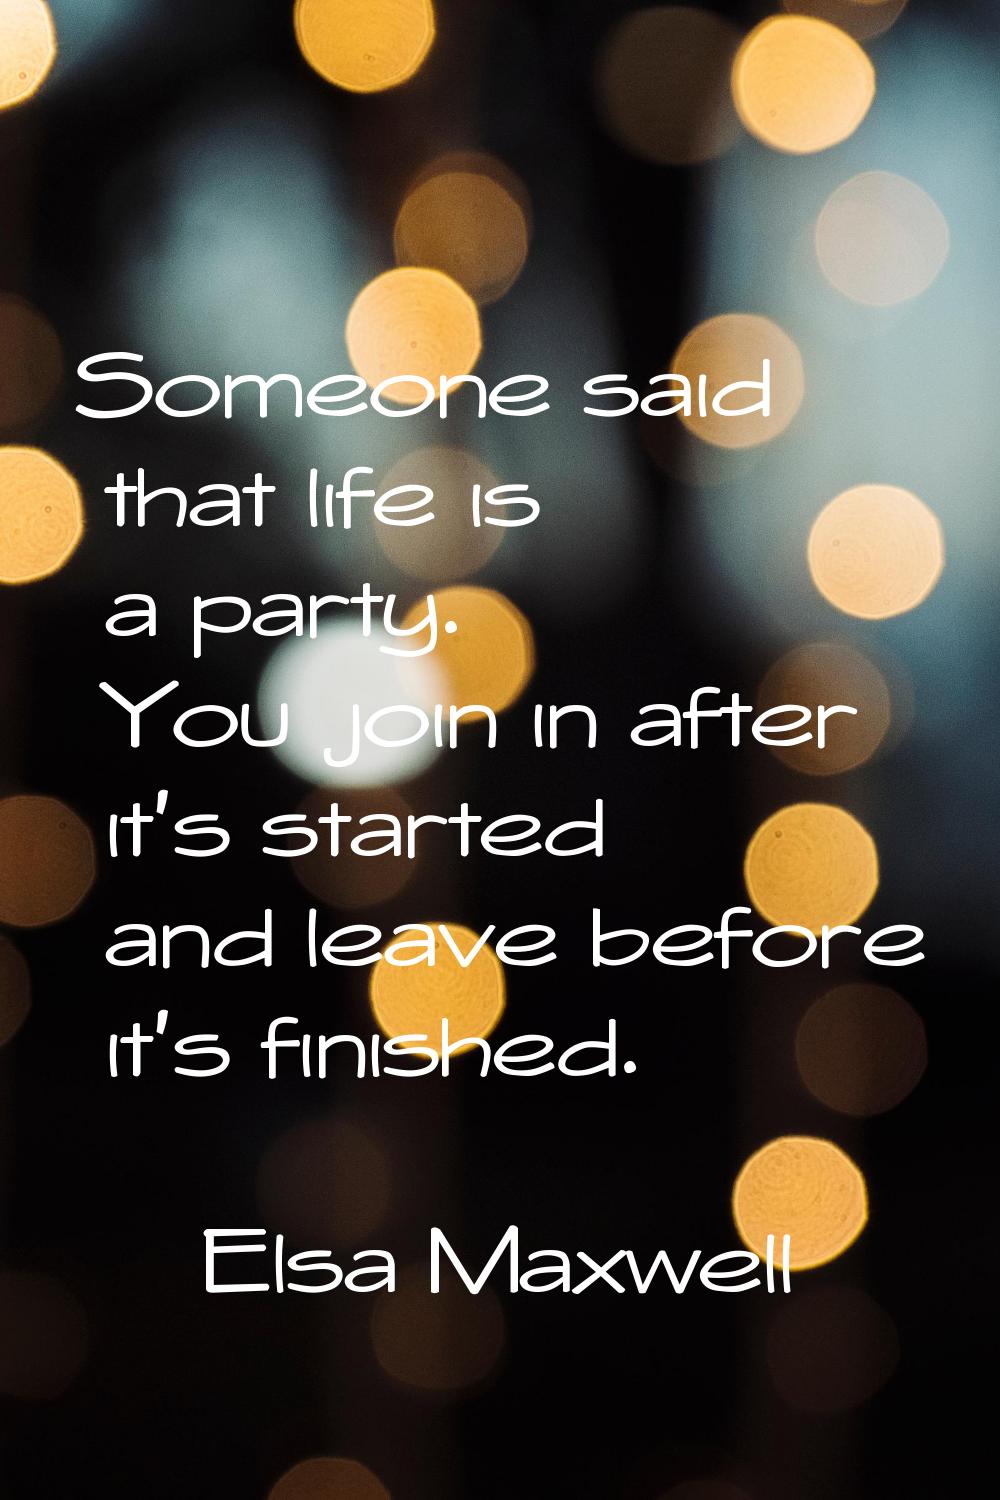 Someone said that life is a party. You join in after it's started and leave before it's finished.